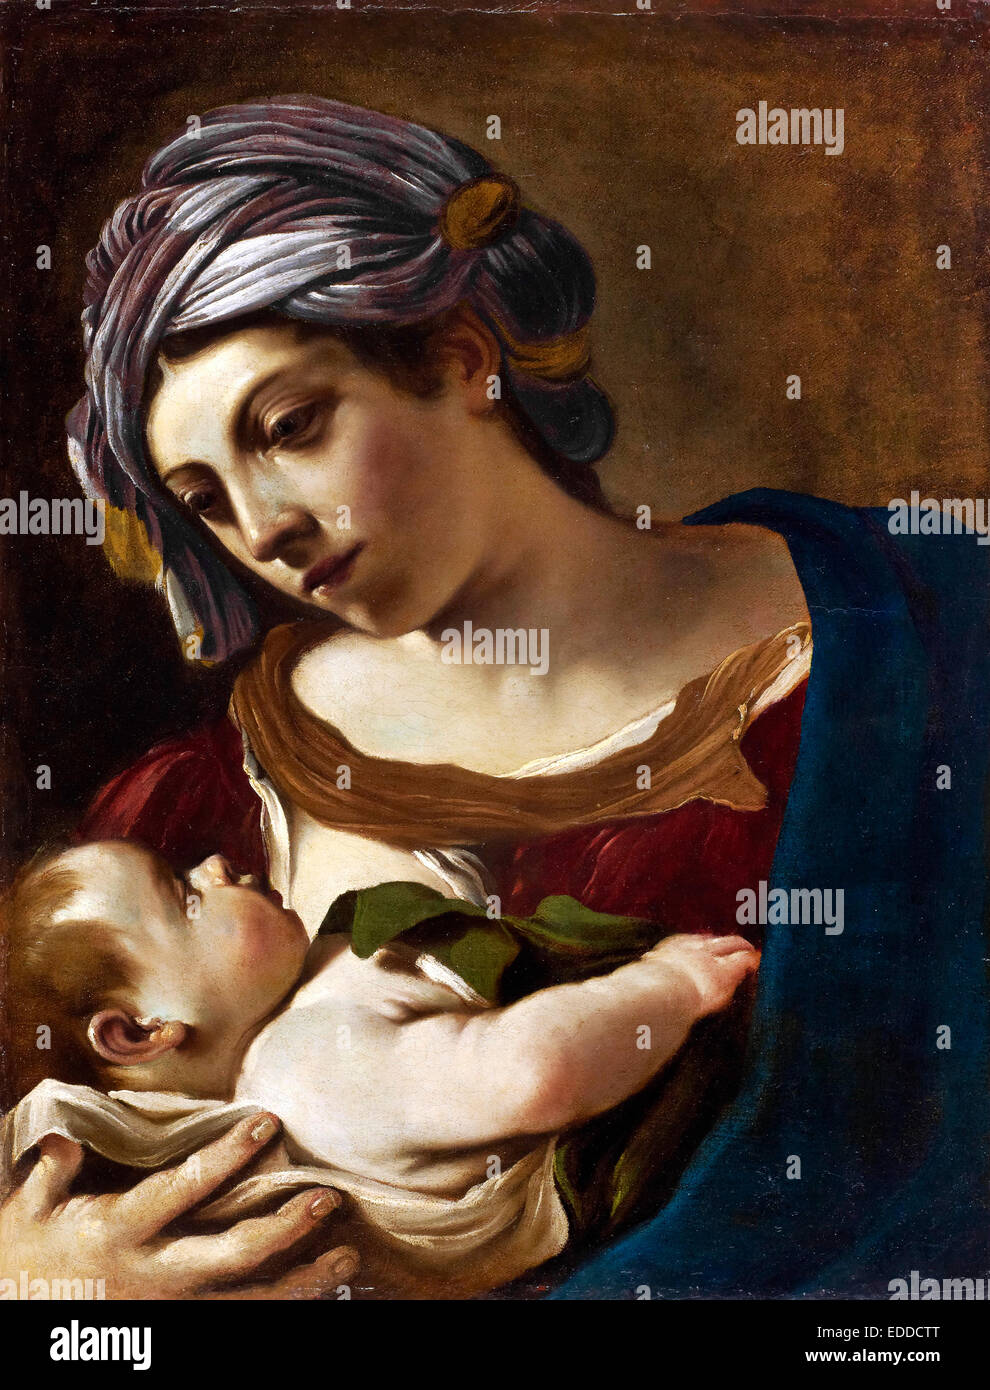 Guercino, Madonna and Child 1621 Oil on canvas. Stadel, Frankfurt am Main, Germany. Stock Photo